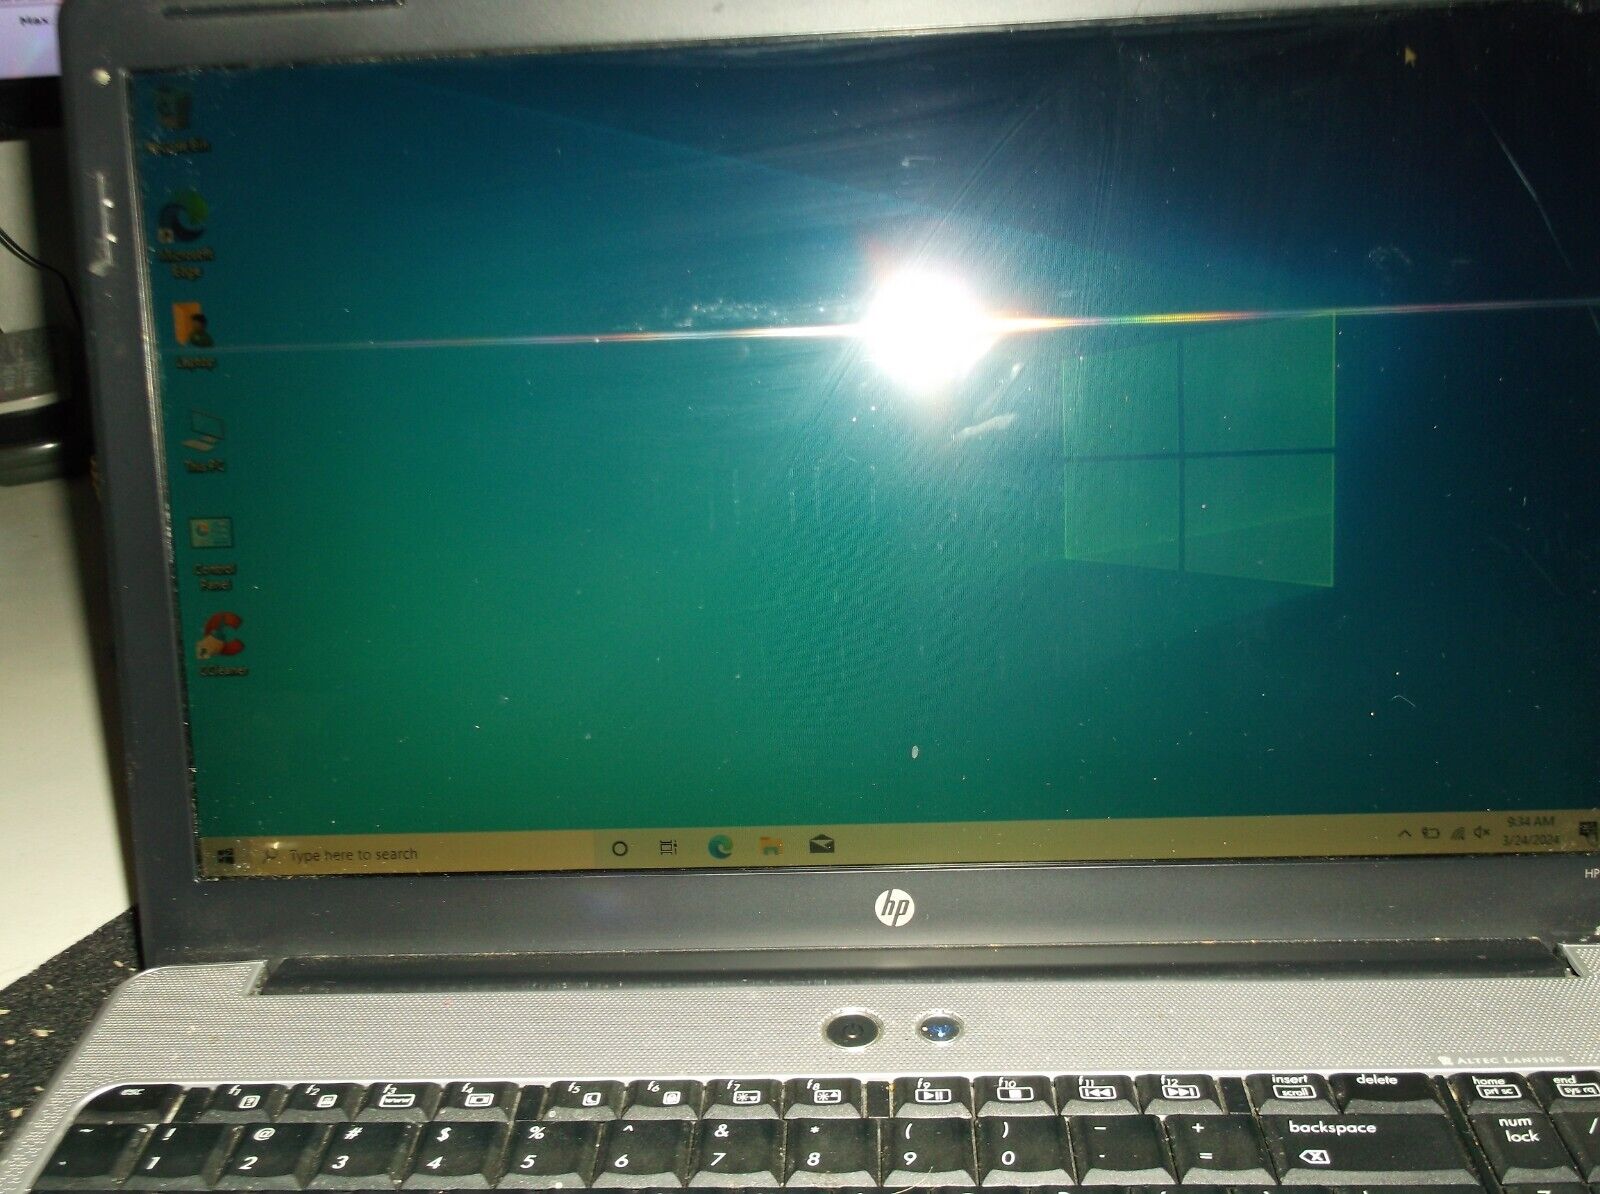 HP G61 LAPTOP - working, selling for parts. Its old but it runs :)